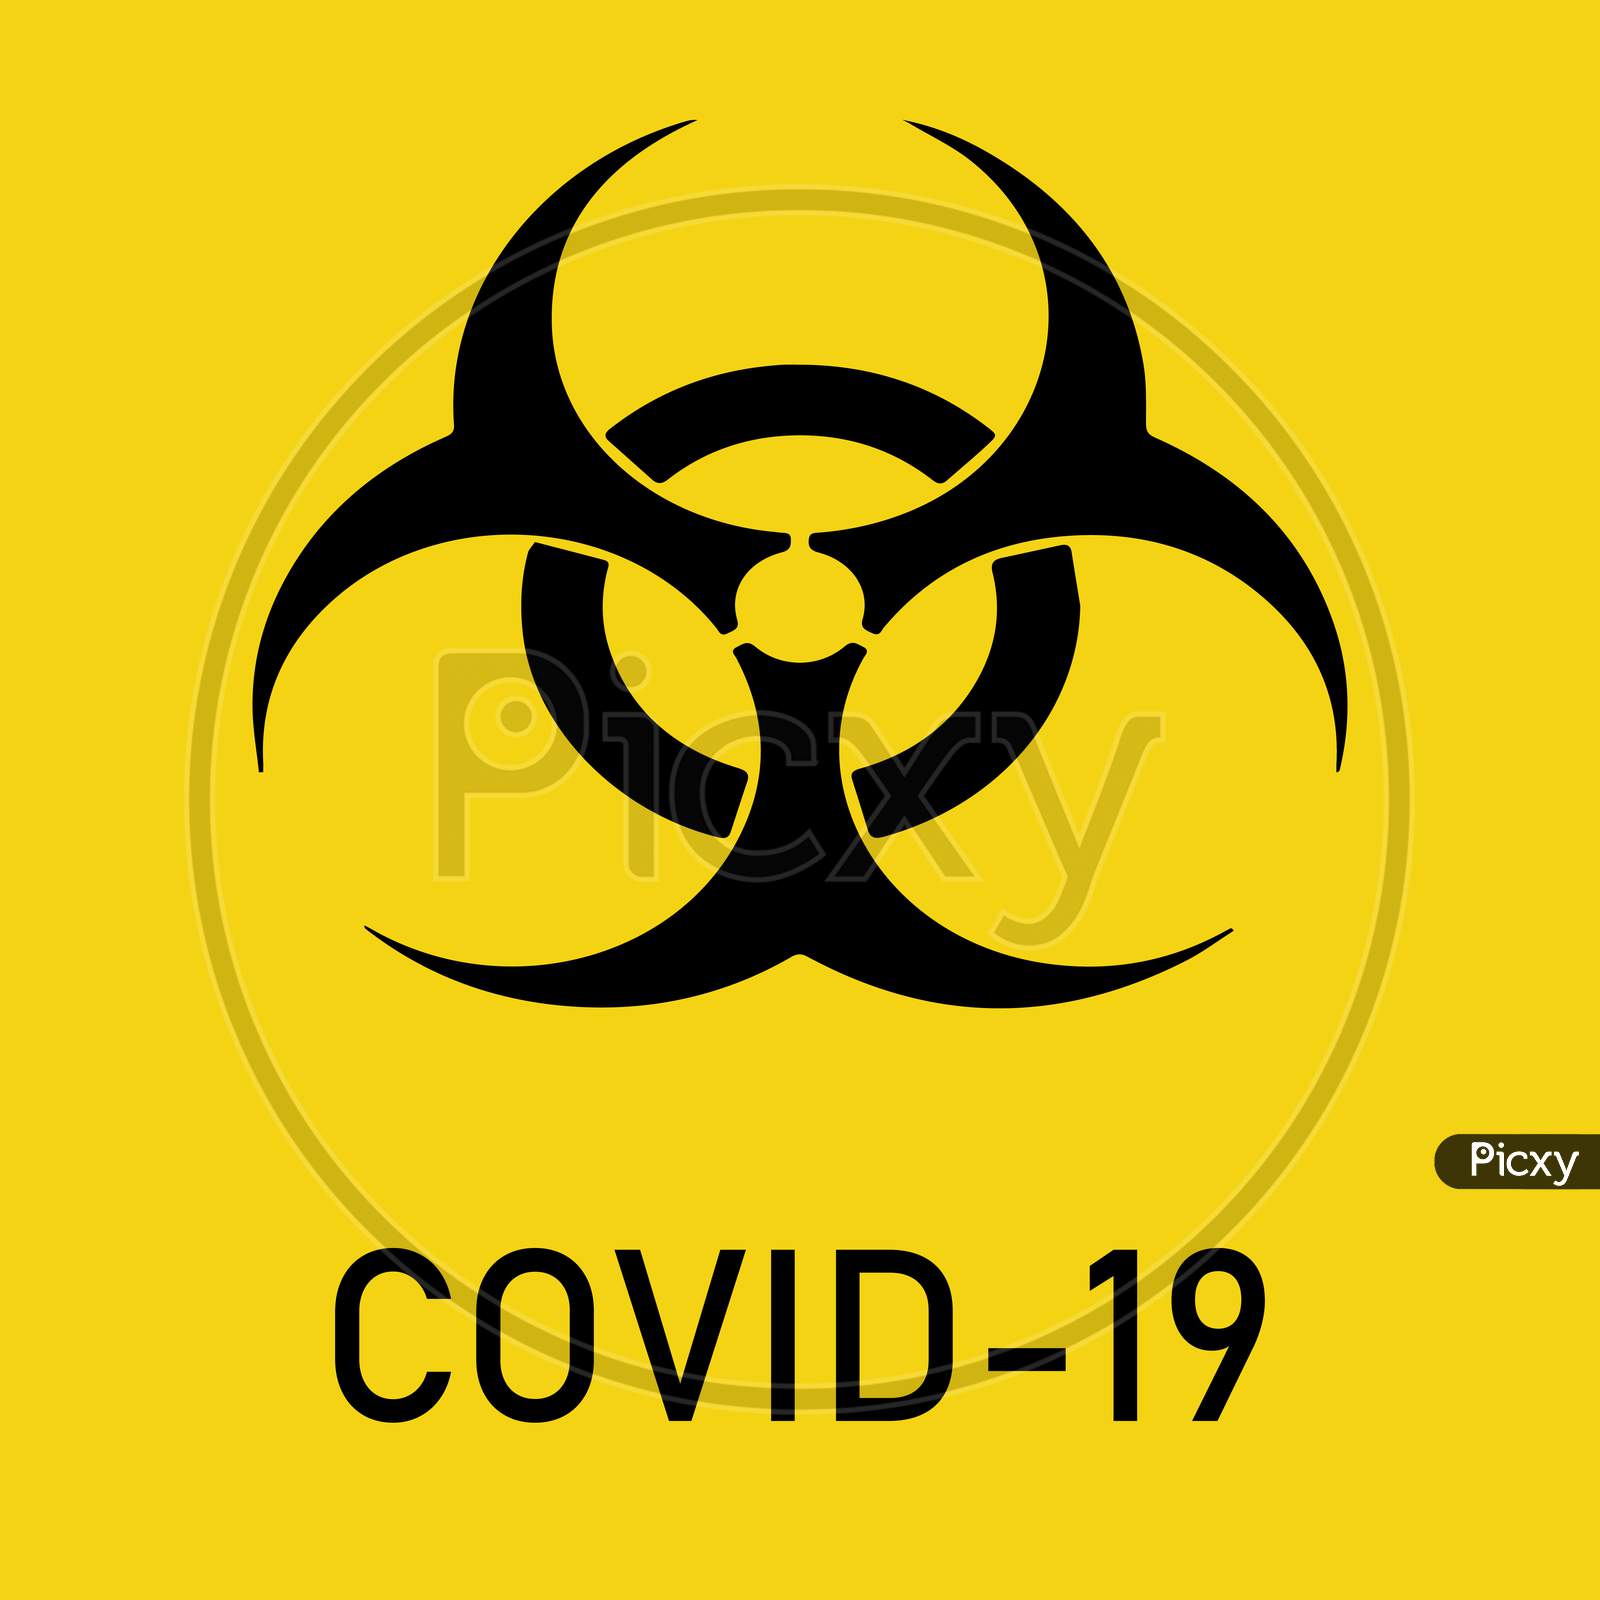 Covid-19 Biohazard Warning Poster. Vector Template For Posters, Banners, Advertising. Danger Of Infection From Coronavirus Sign. Concept.